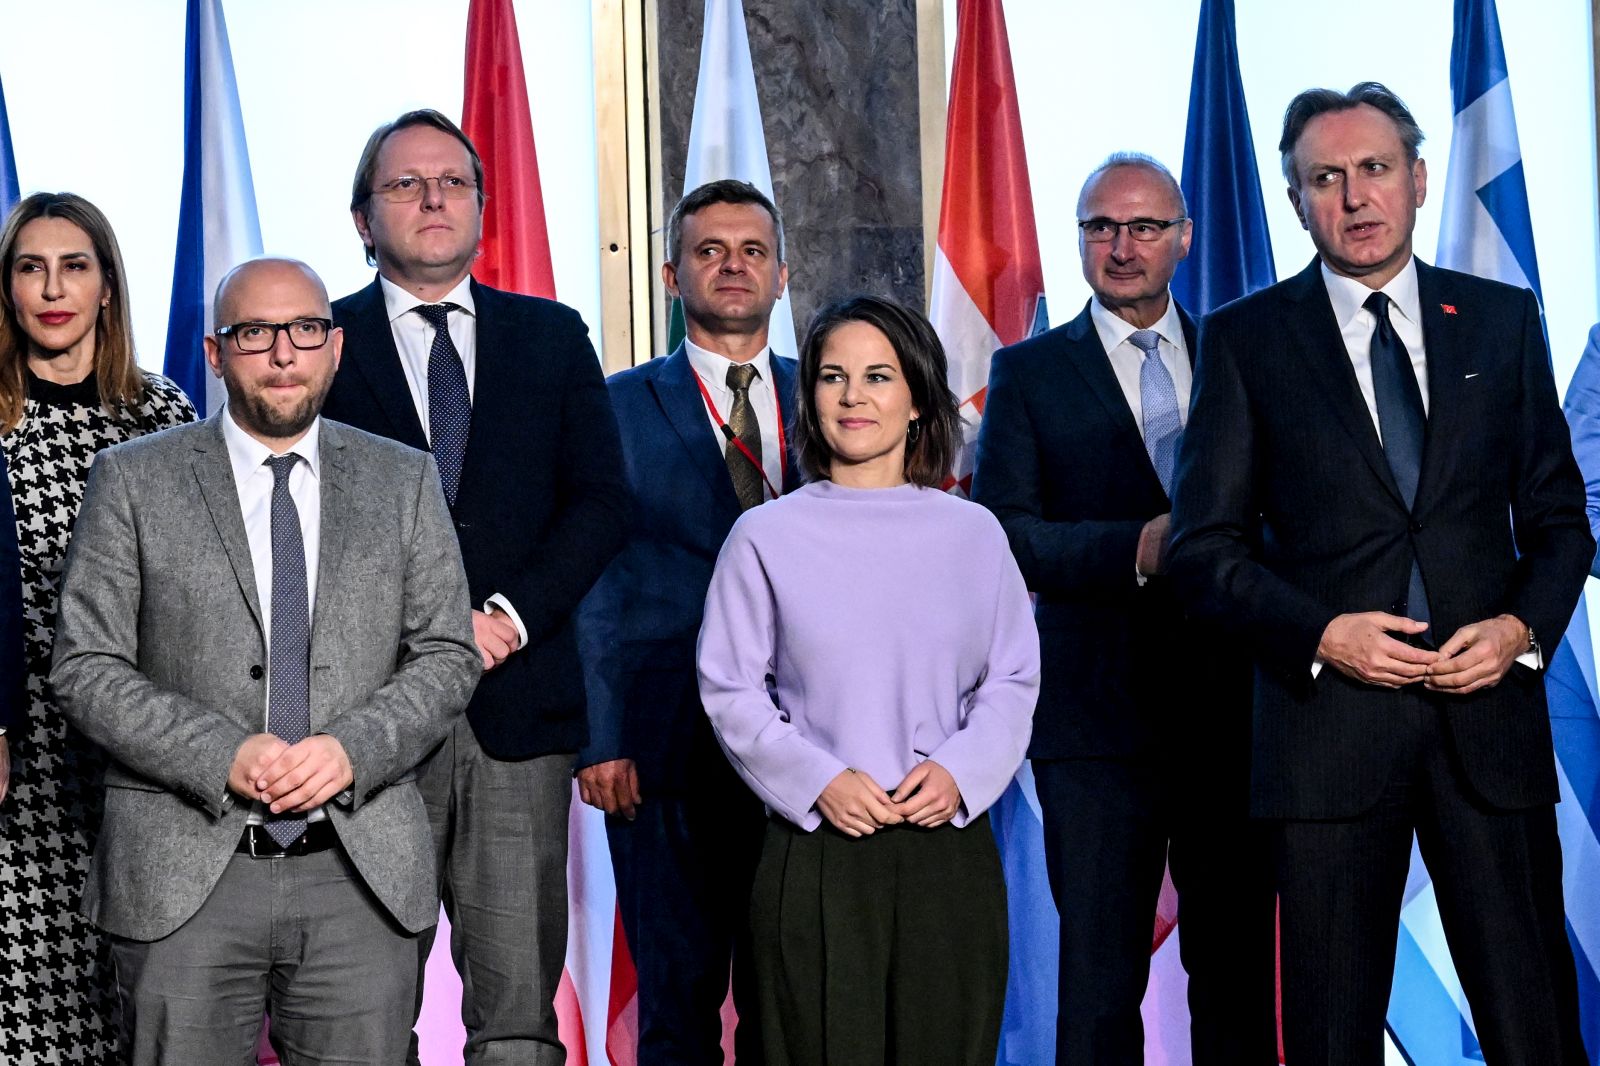 epa10256873 German Foreign Minister Annalena Baerbock (C) and counterparts from the Western Balkans countries and Austria, Bulgaria, Croatia, the Czech Republic, Greece and Slovenia pose for family photo during the opening of Western Balkans Foreign Ministers meeting as part of Western Balkans Summit Berlin 2022 at the Federal Foreign Office in Berlin, German, 21 October 2022. The Western Balkans Summit Berlin 2022 will take place on 03 November 2022.  EPA/FILIP SINGER